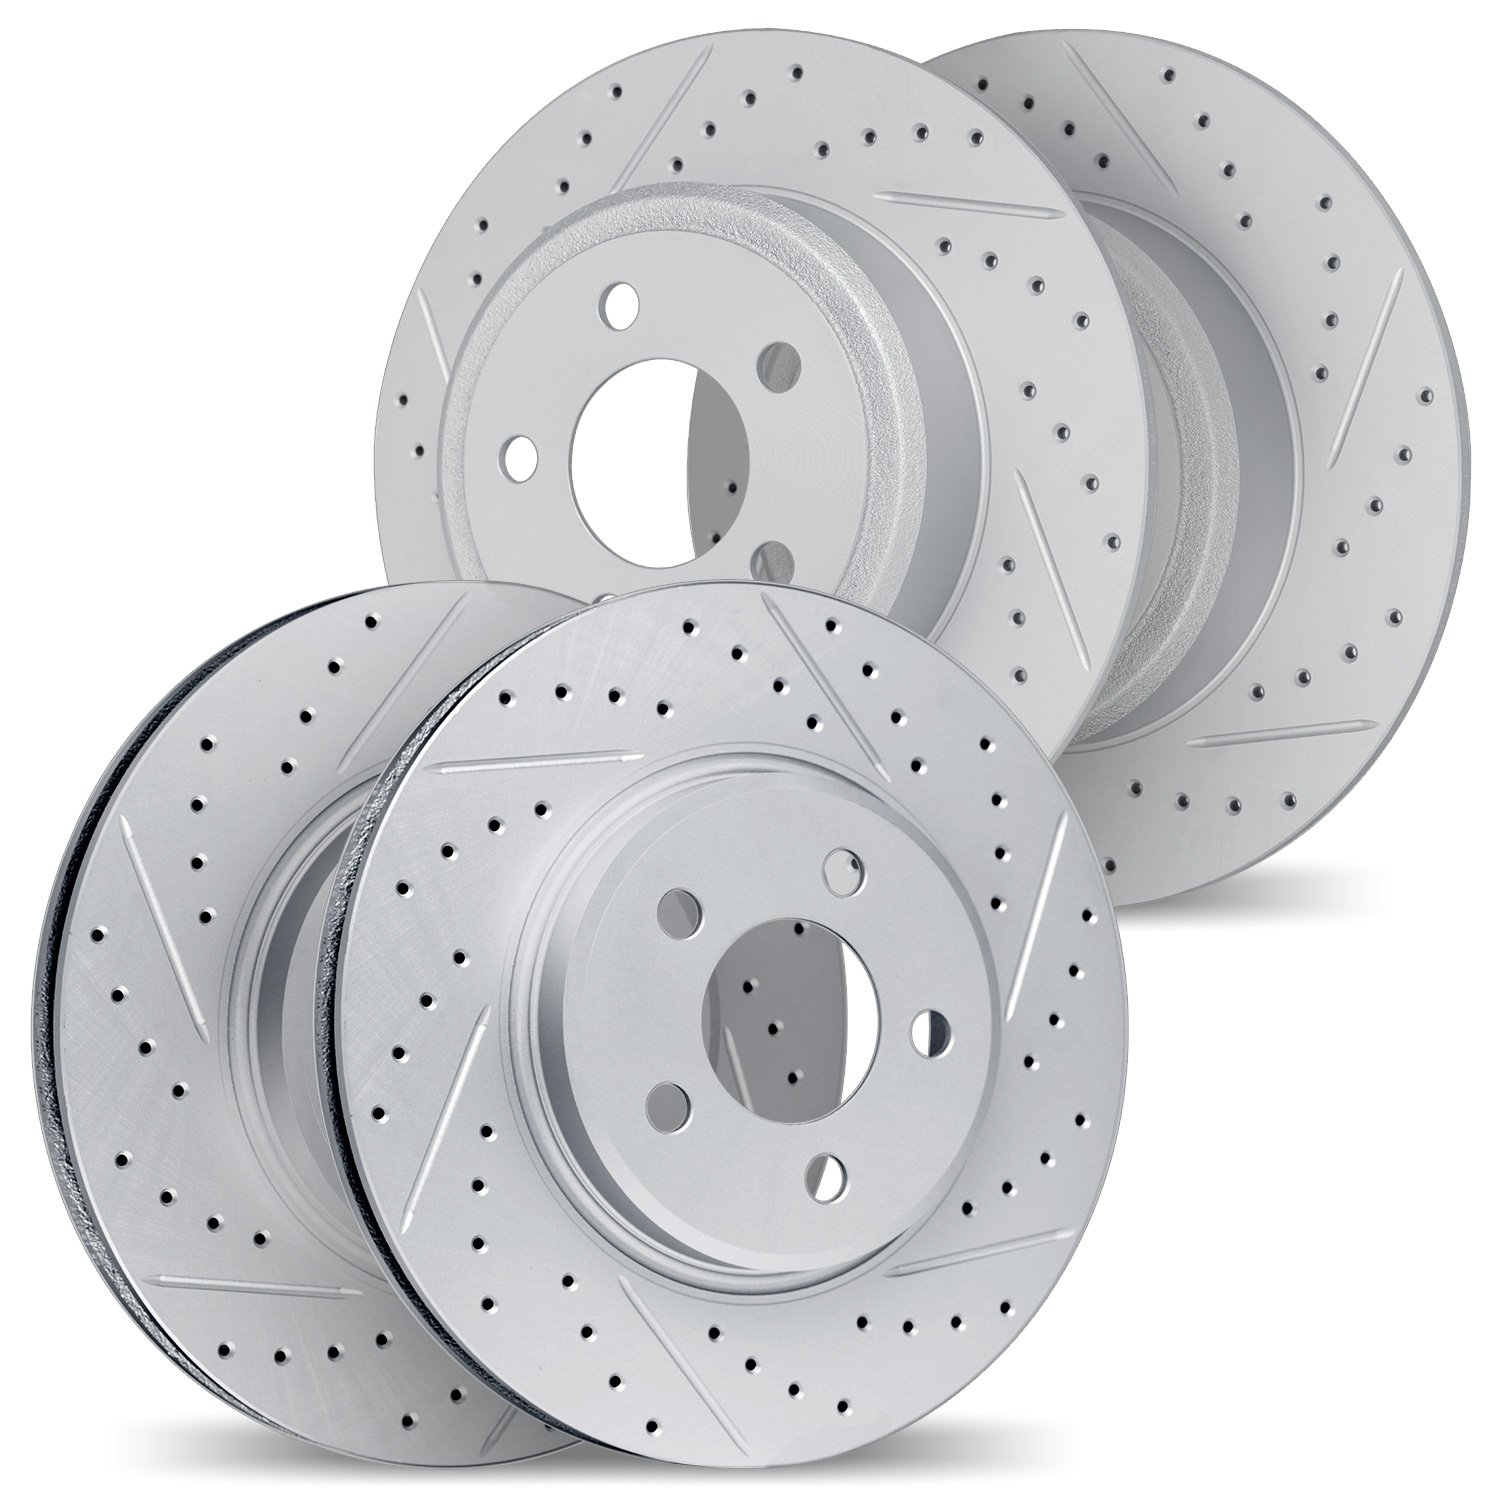 2004-03064 Geoperformance Drilled/Slotted Brake Rotors, 2014-2017 Kia/Hyundai/Genesis, Position: Front and Rear